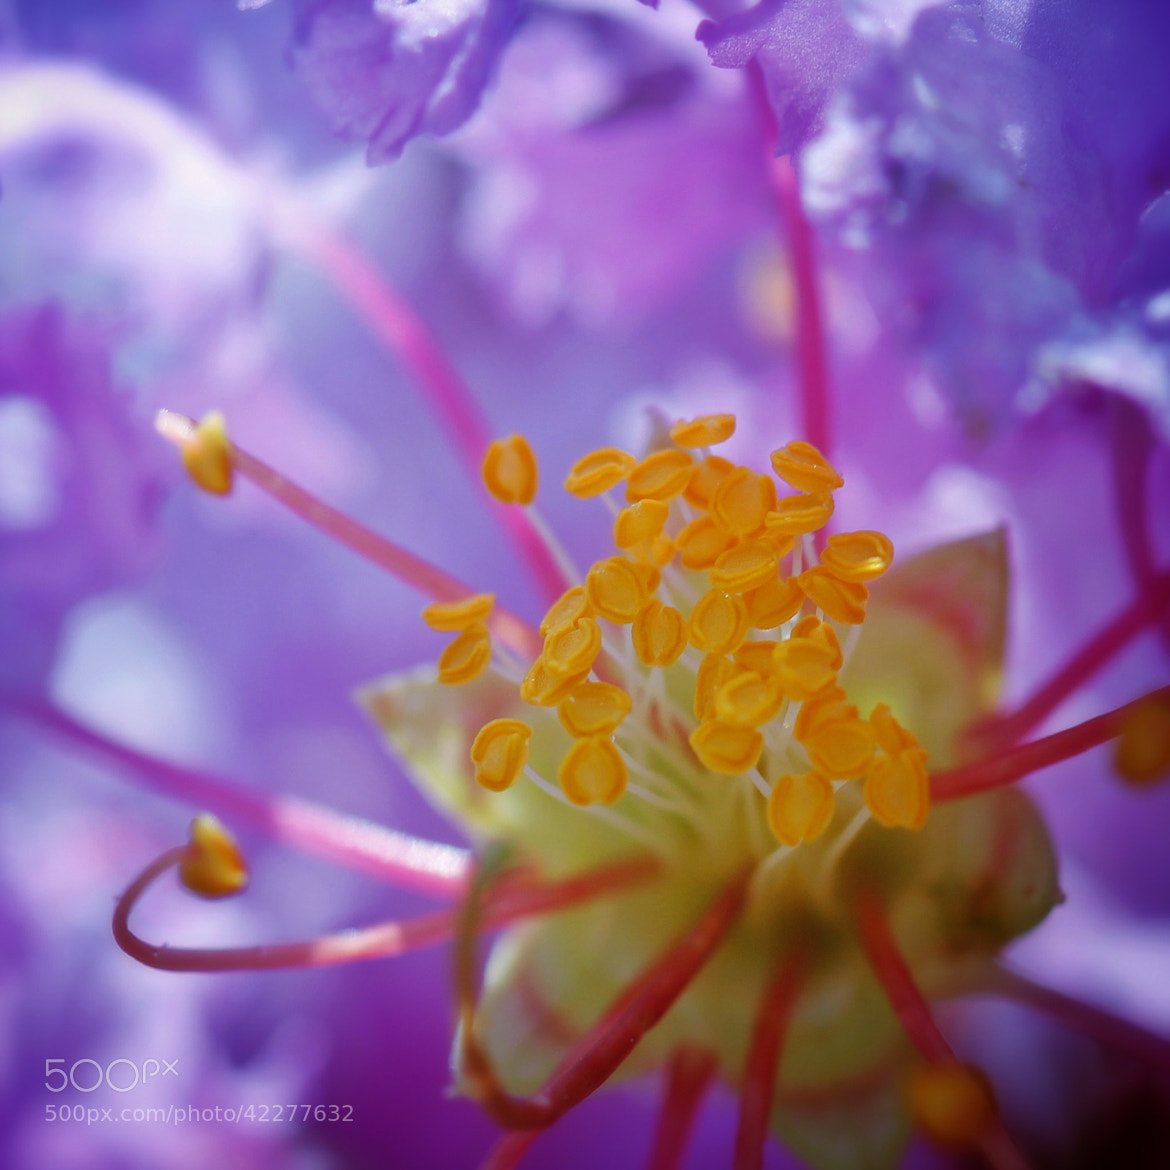 Heart of the Crepe Myrtle by Lisa Miller on 500px.com